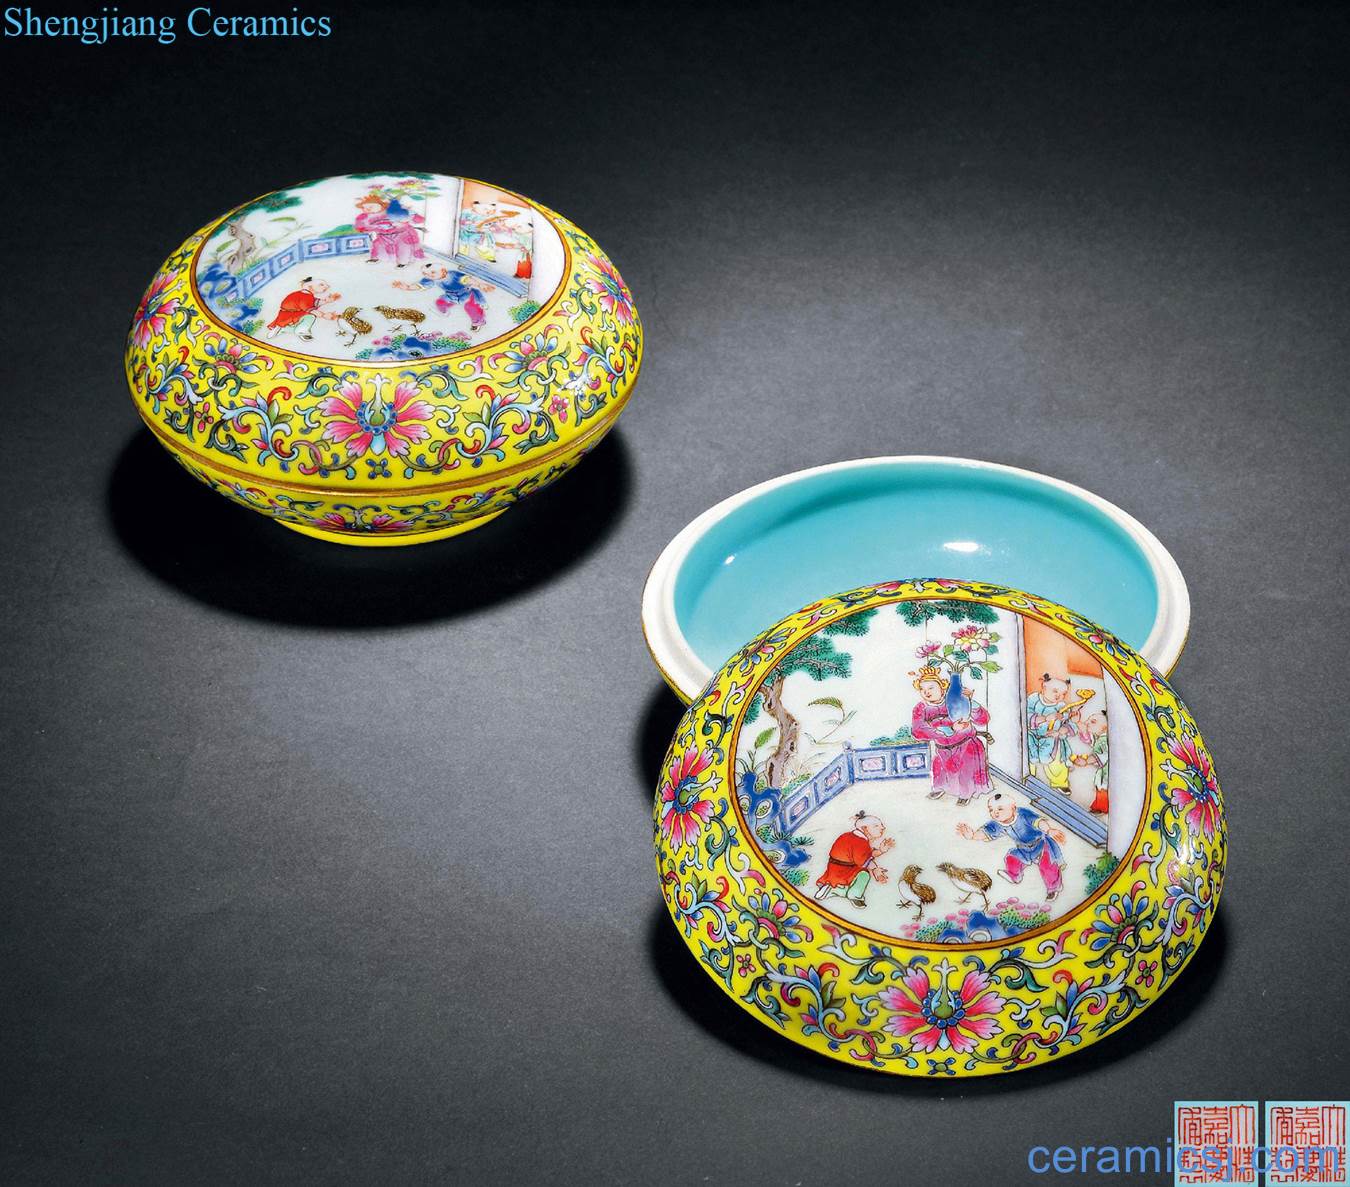 Qing jiaqing to pastel yellow medallion baby play figure pods, (a)